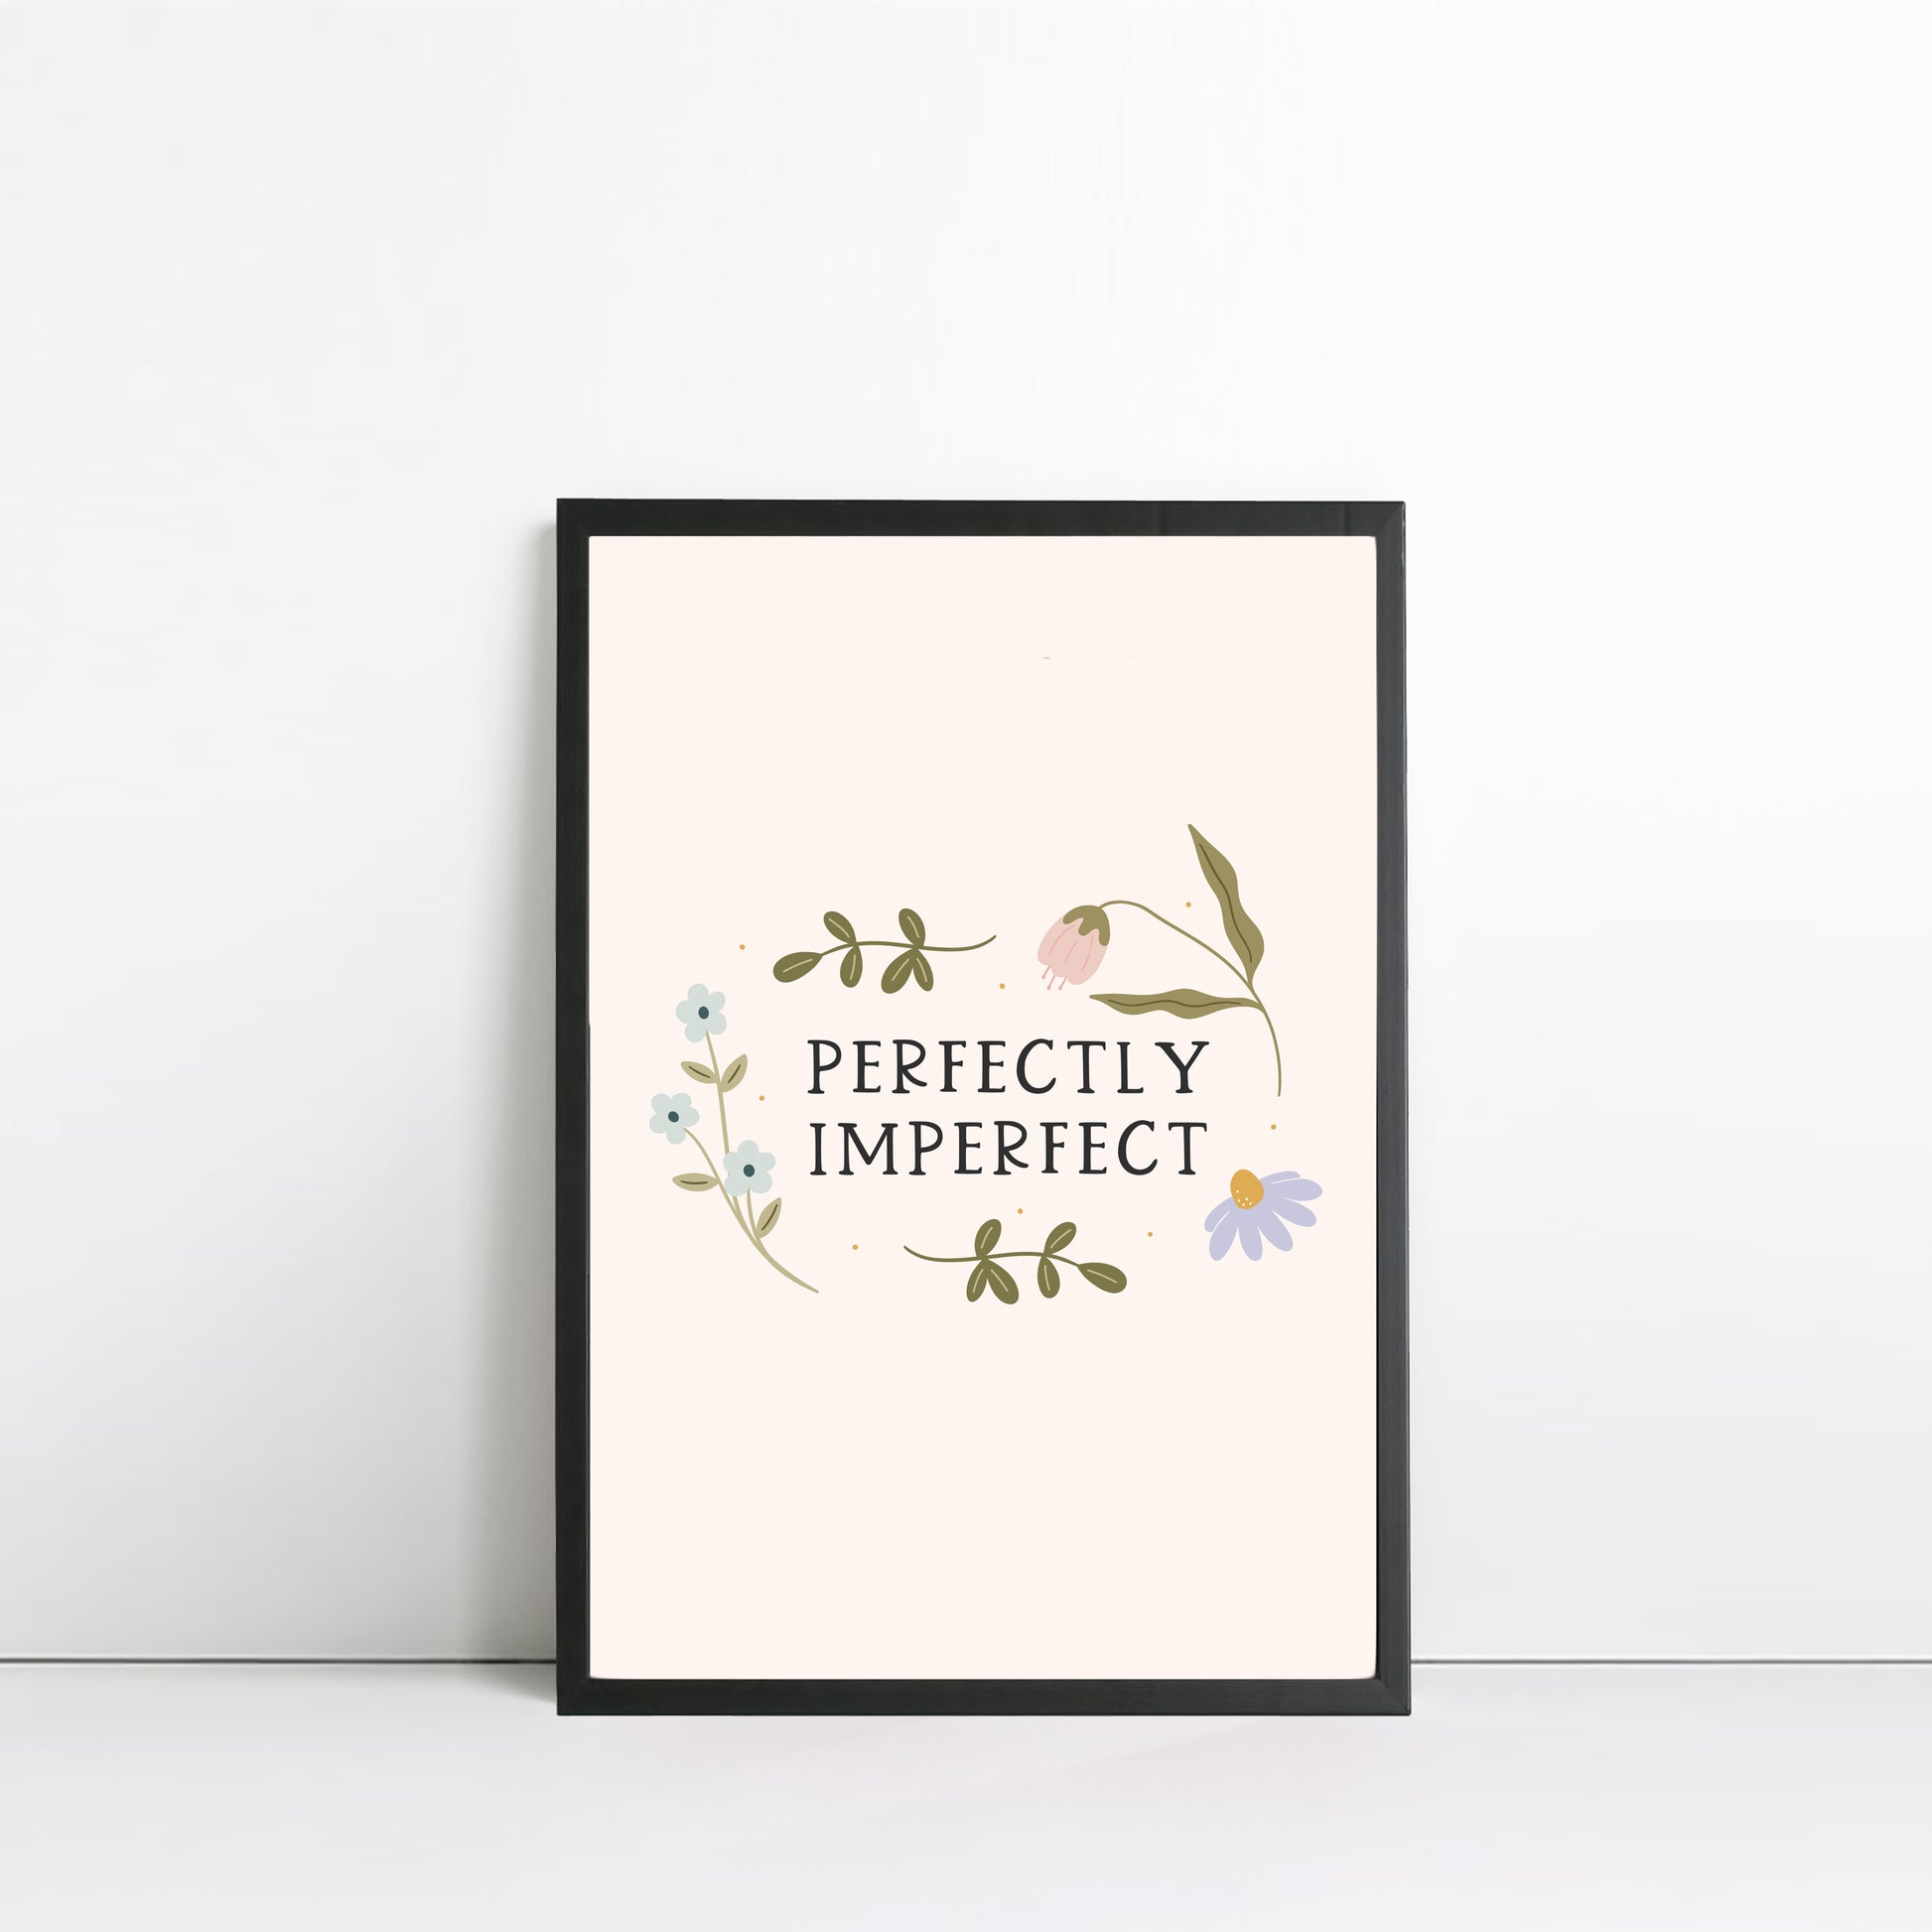 Perfectly Imperfect children's art print by Abbie Imagine